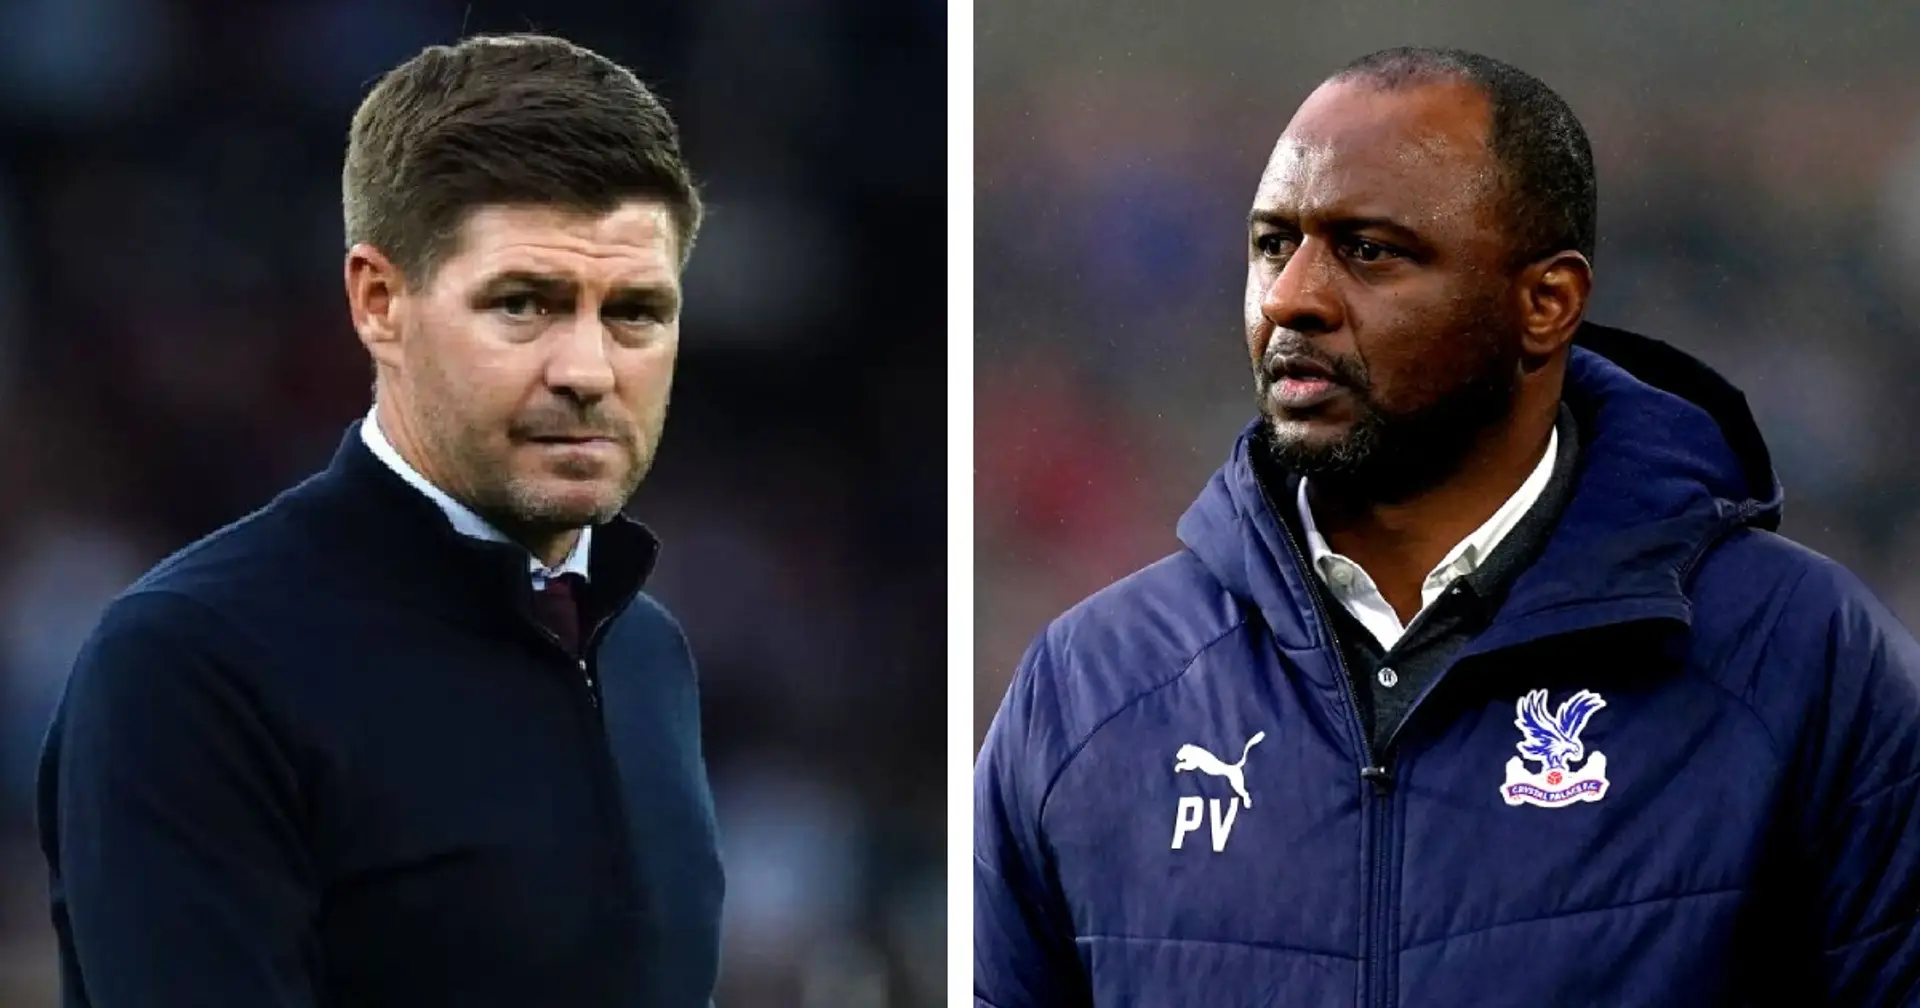 Gerrard in the running for Crystal Palace job as Patrick Vieira gets sacked